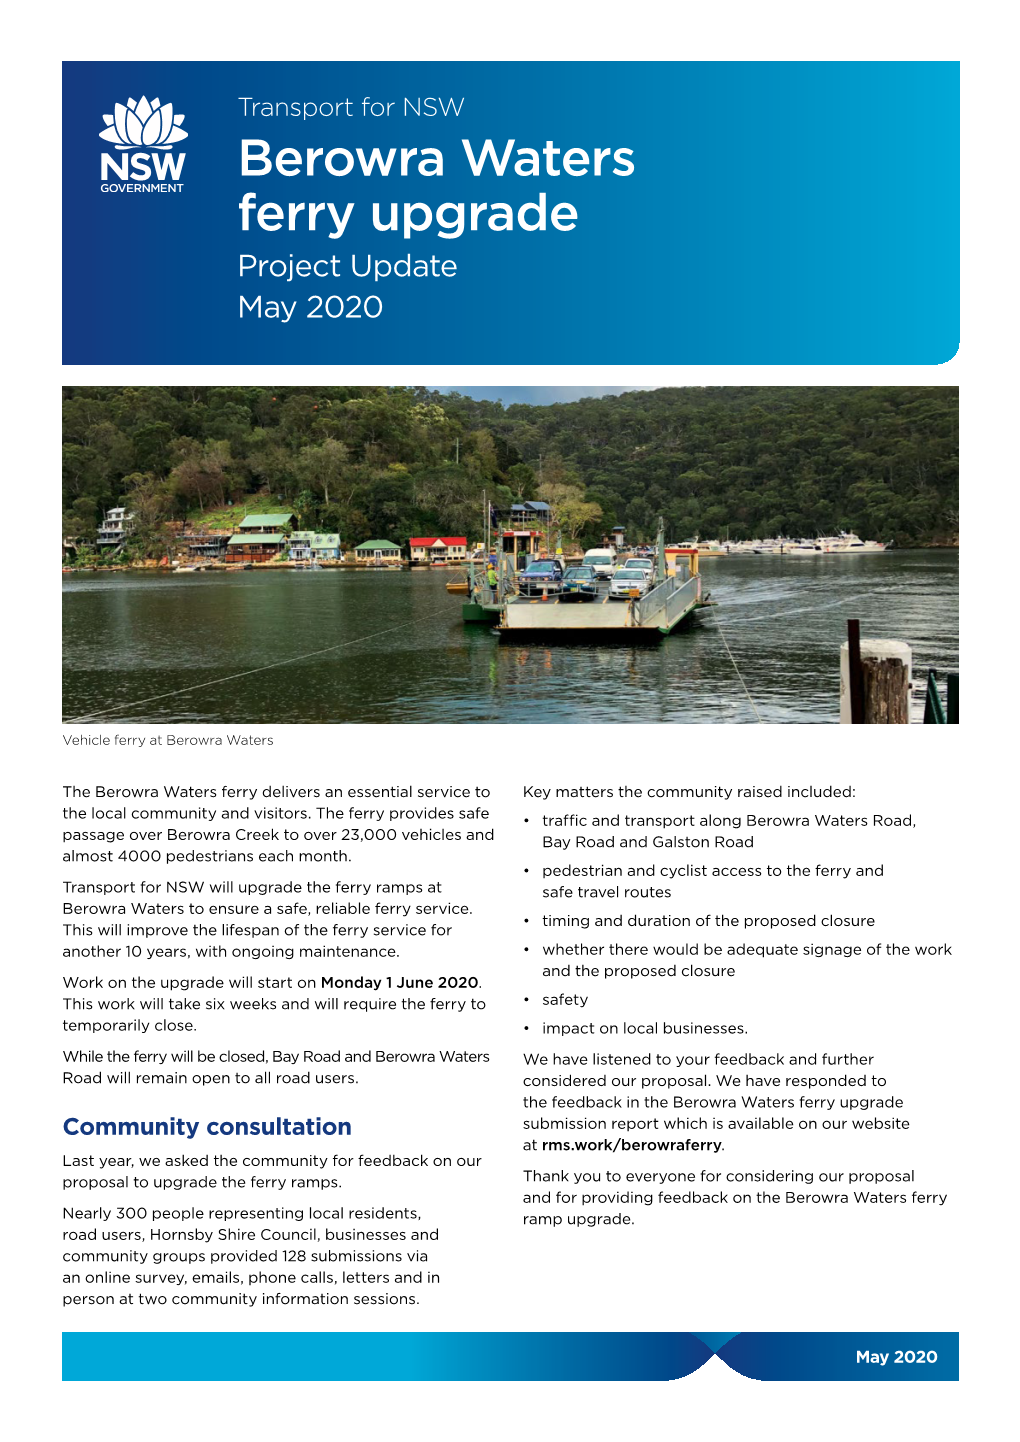 Berowra Waters Ferry Upgrade Project Update May 2020